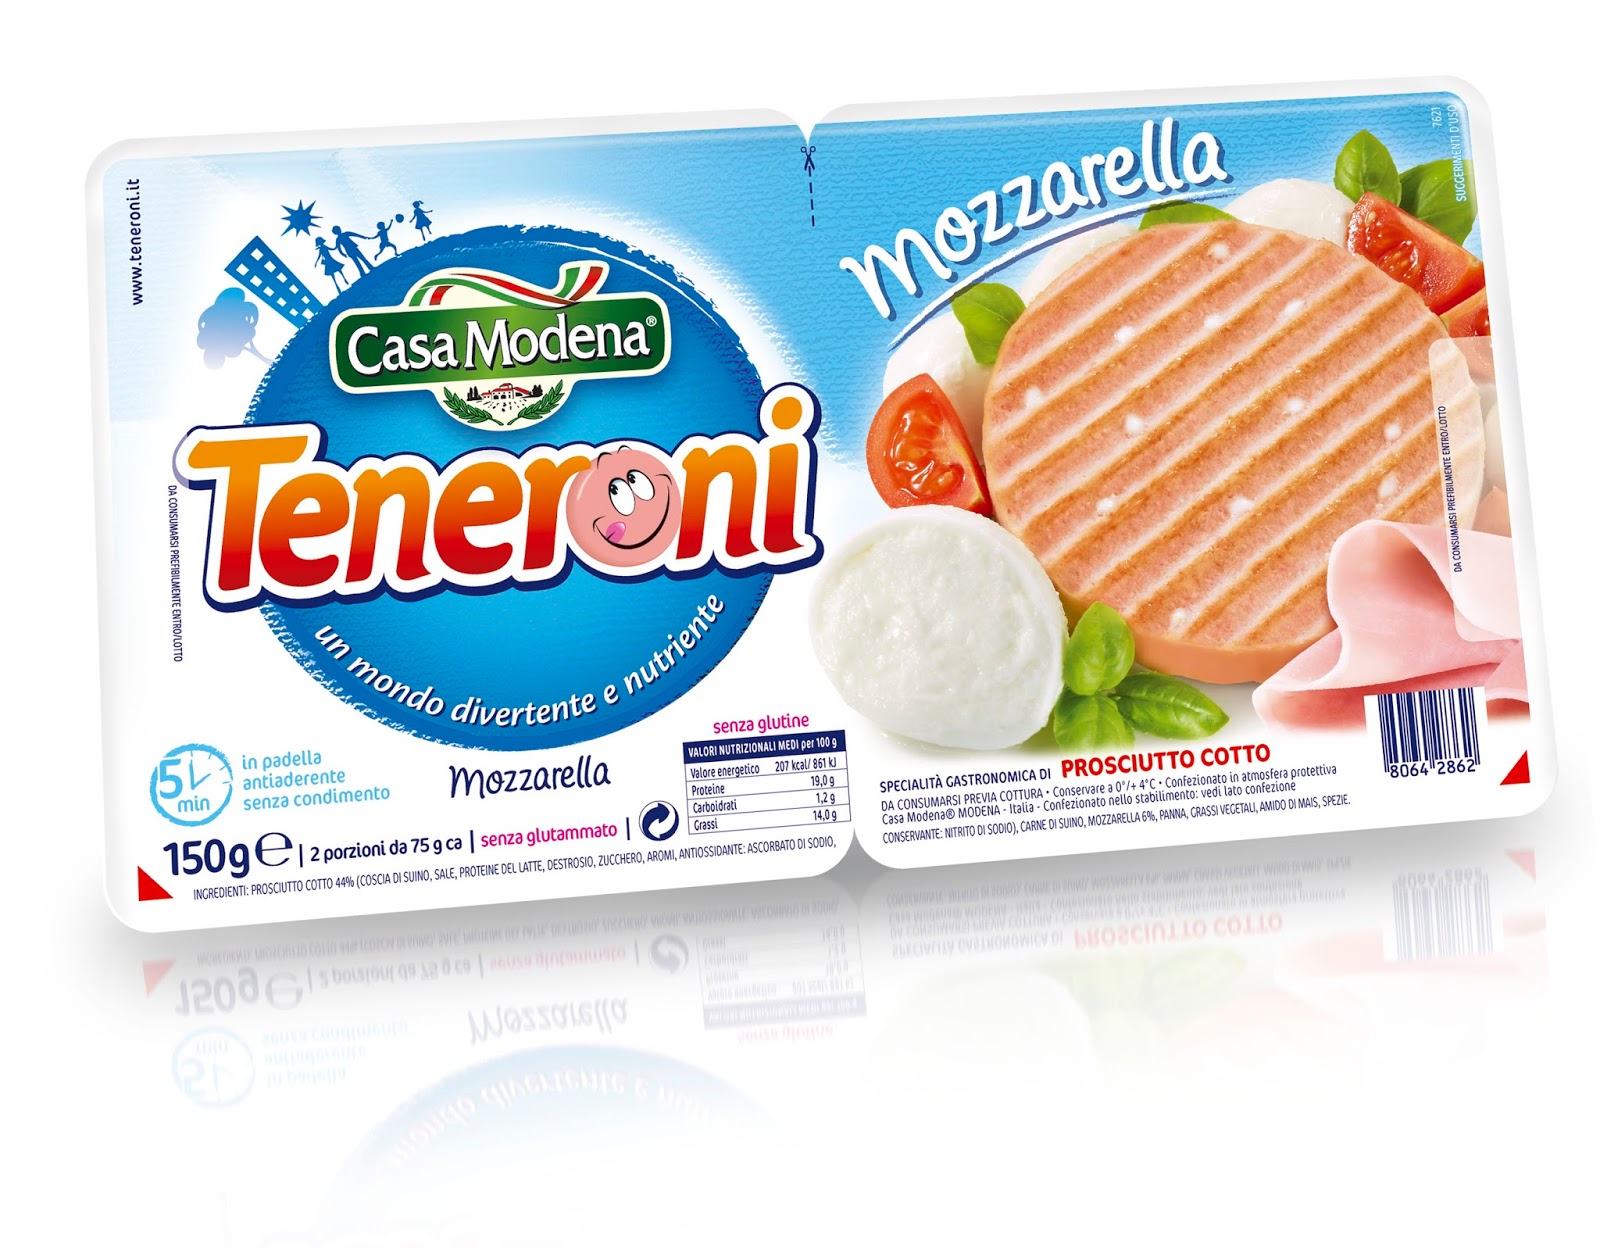 Teneroni – Packaging Of The World